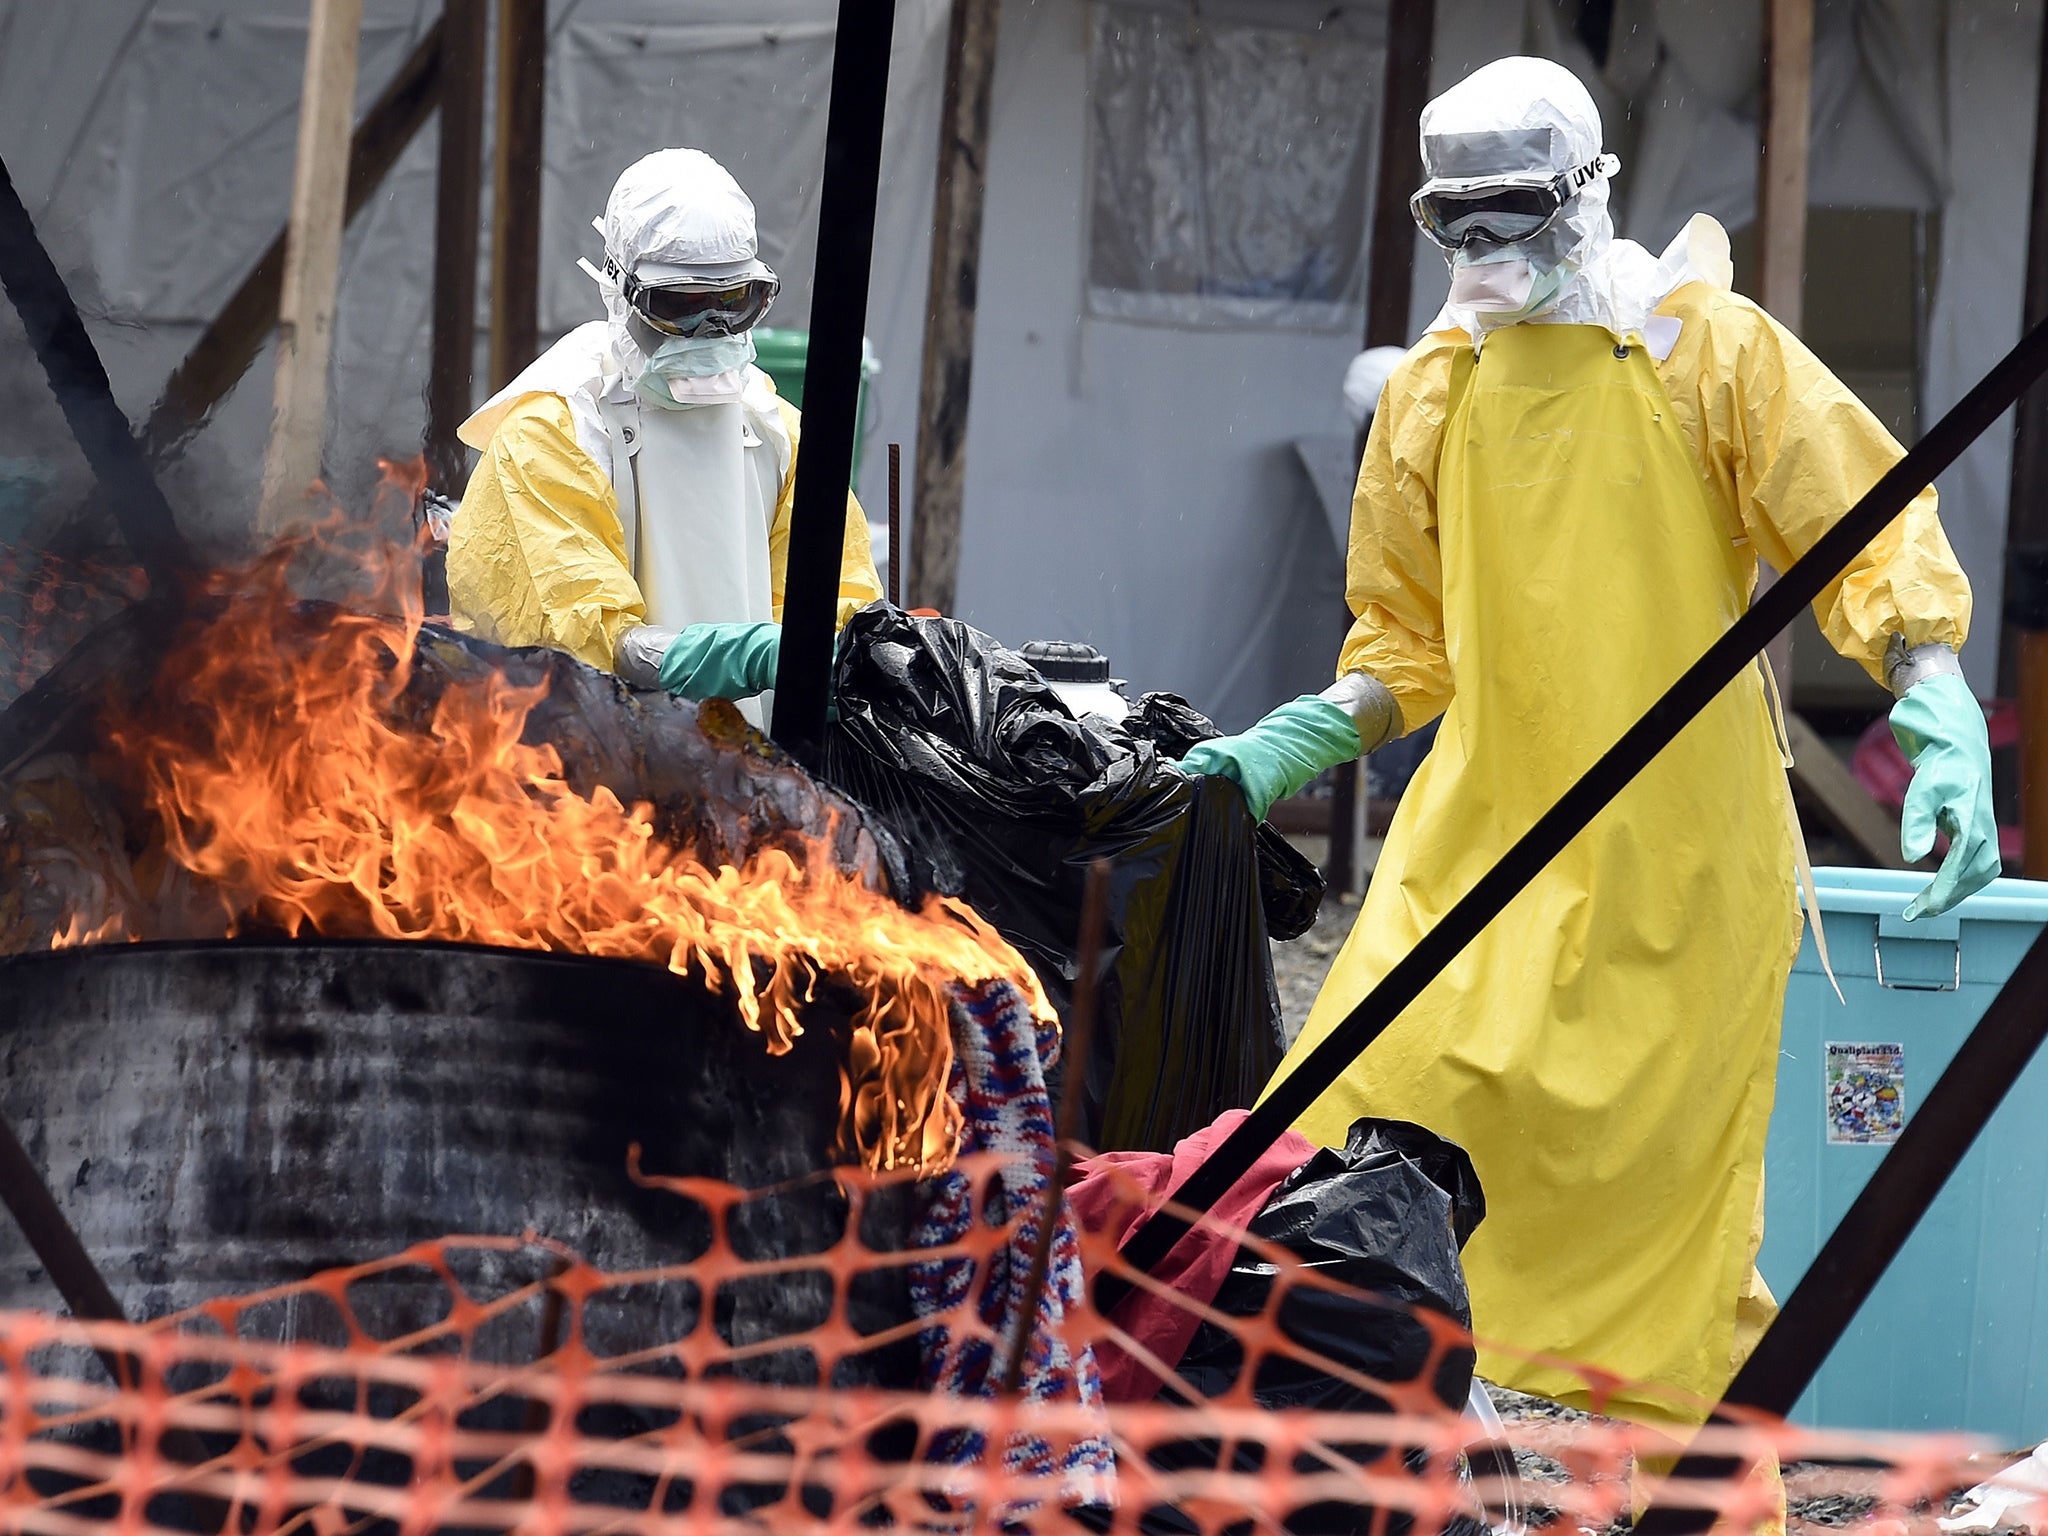 Medical staff members burn clothes belonging to patients suffering from Ebola, at the French medical NGO Medecins Sans Frontieres (MSF) in Monrovia